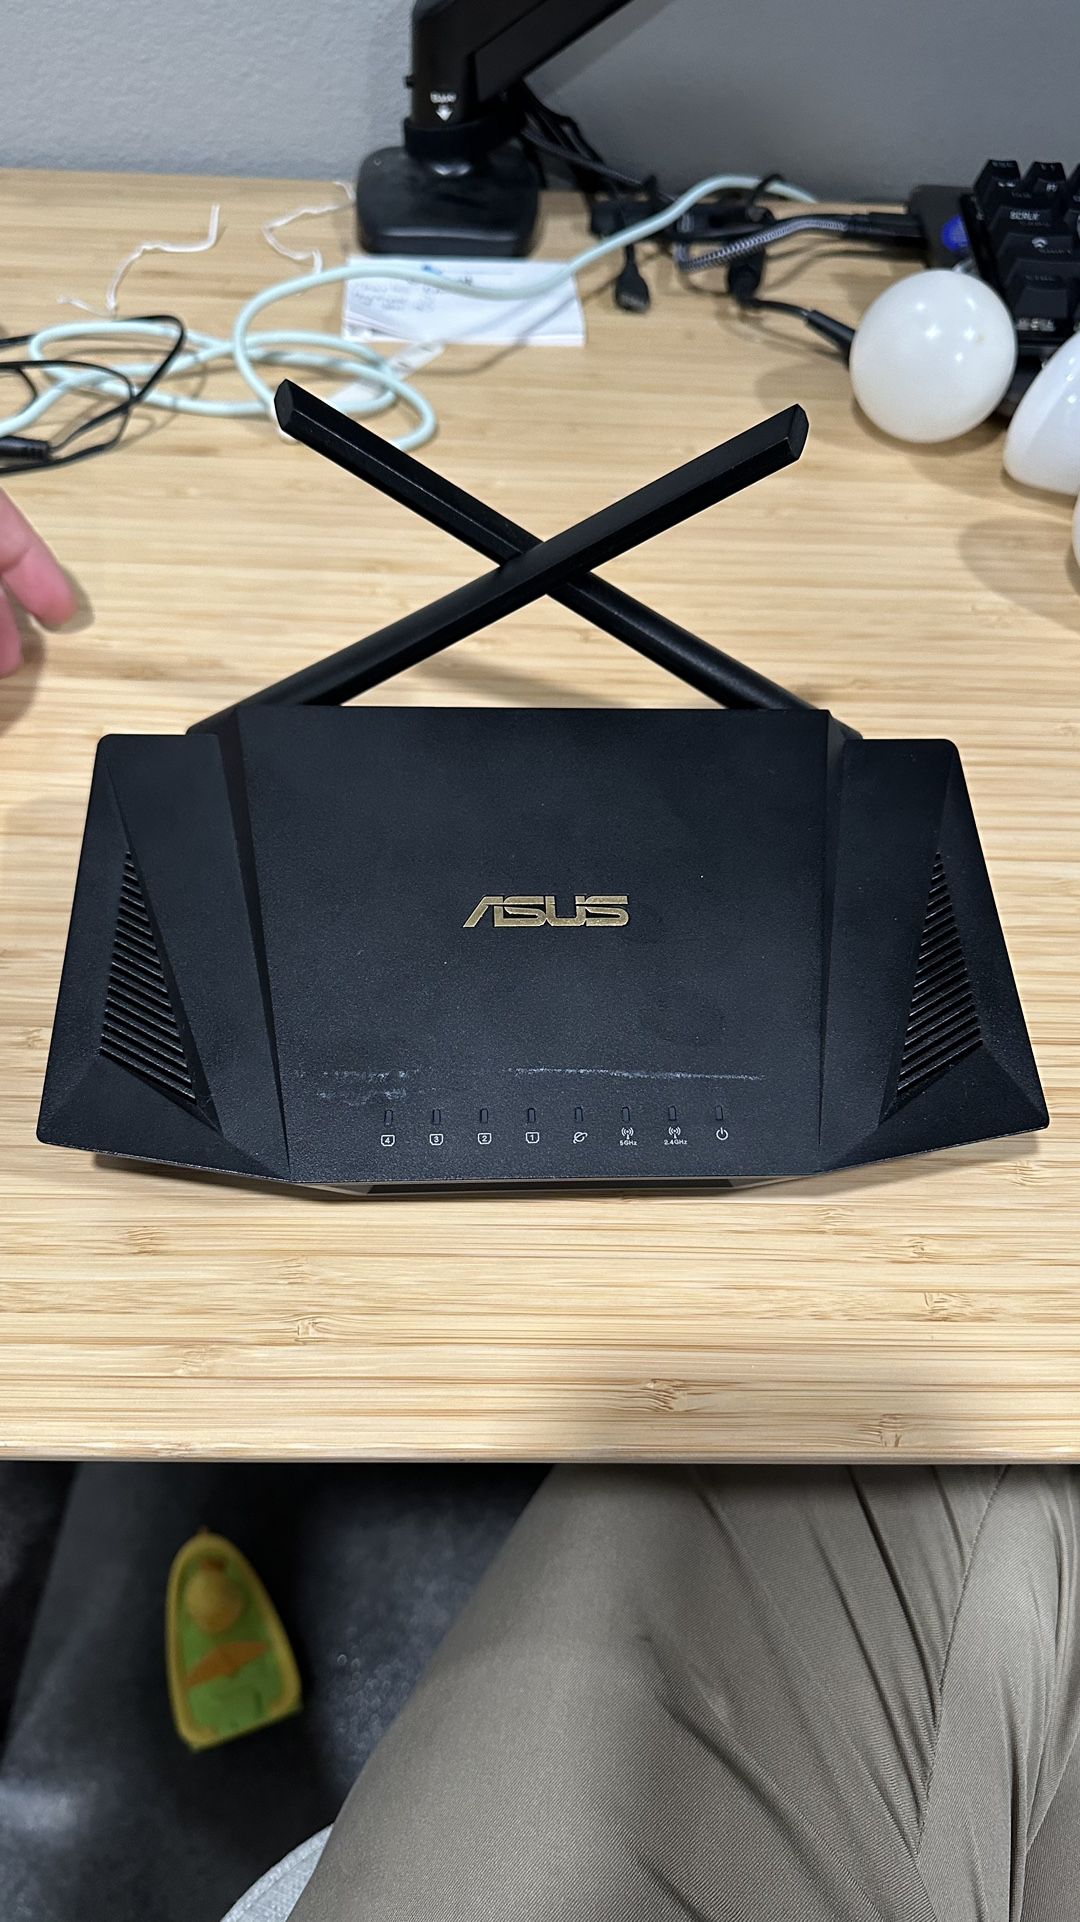 ASUS AX1800 Router